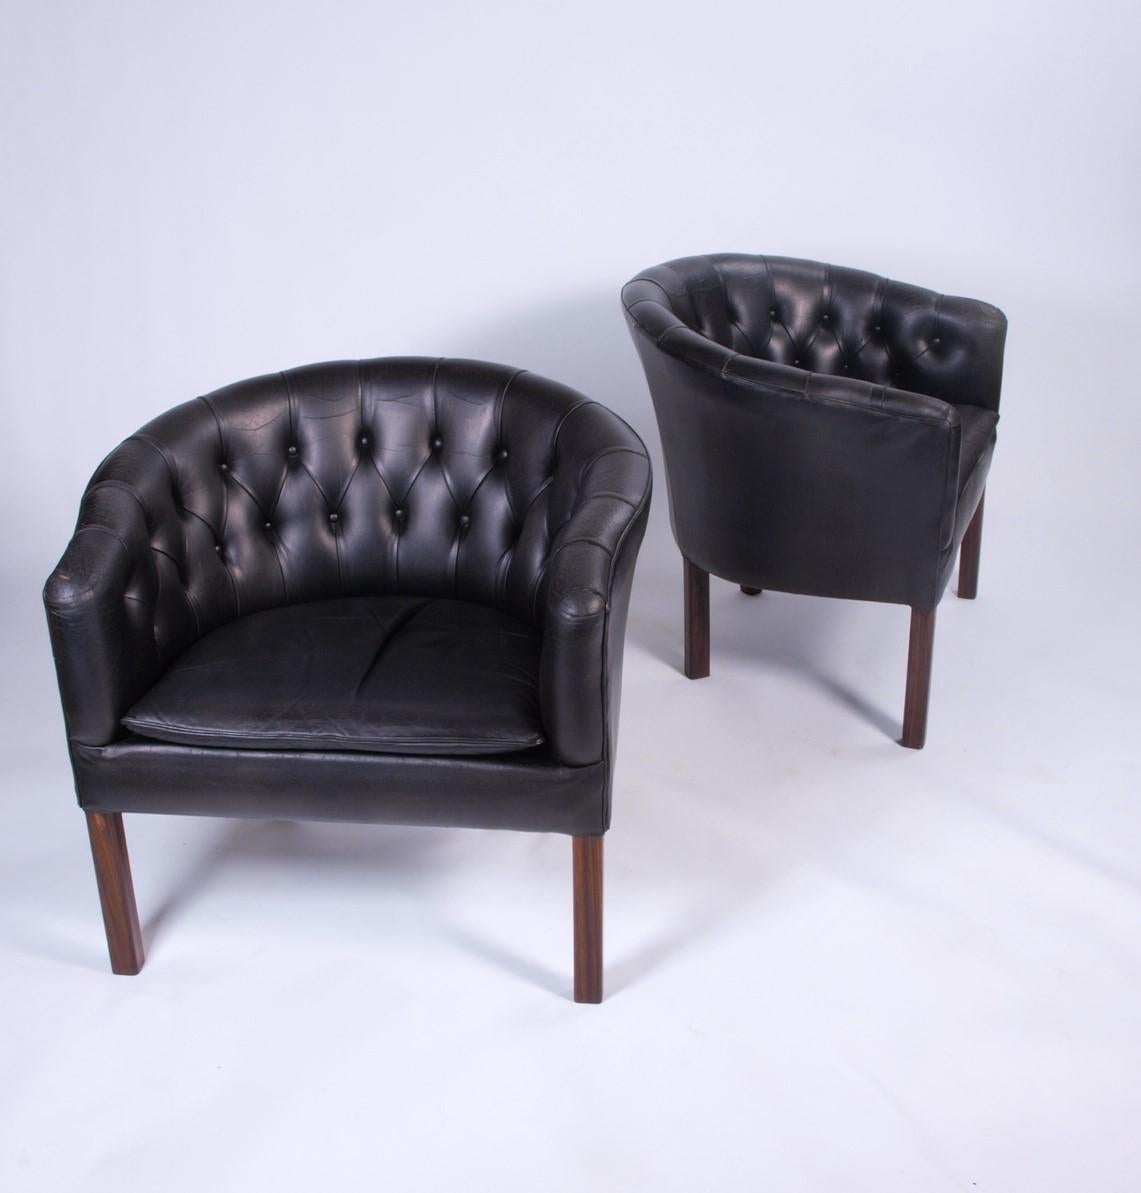 These Danish-made tufted lounge chairs exude timeless elegance. Adorned in rich black patinated leather, they possess a classic allure and retain their charm despite being in a gently used condition. 

While the designer and manufacturer remain